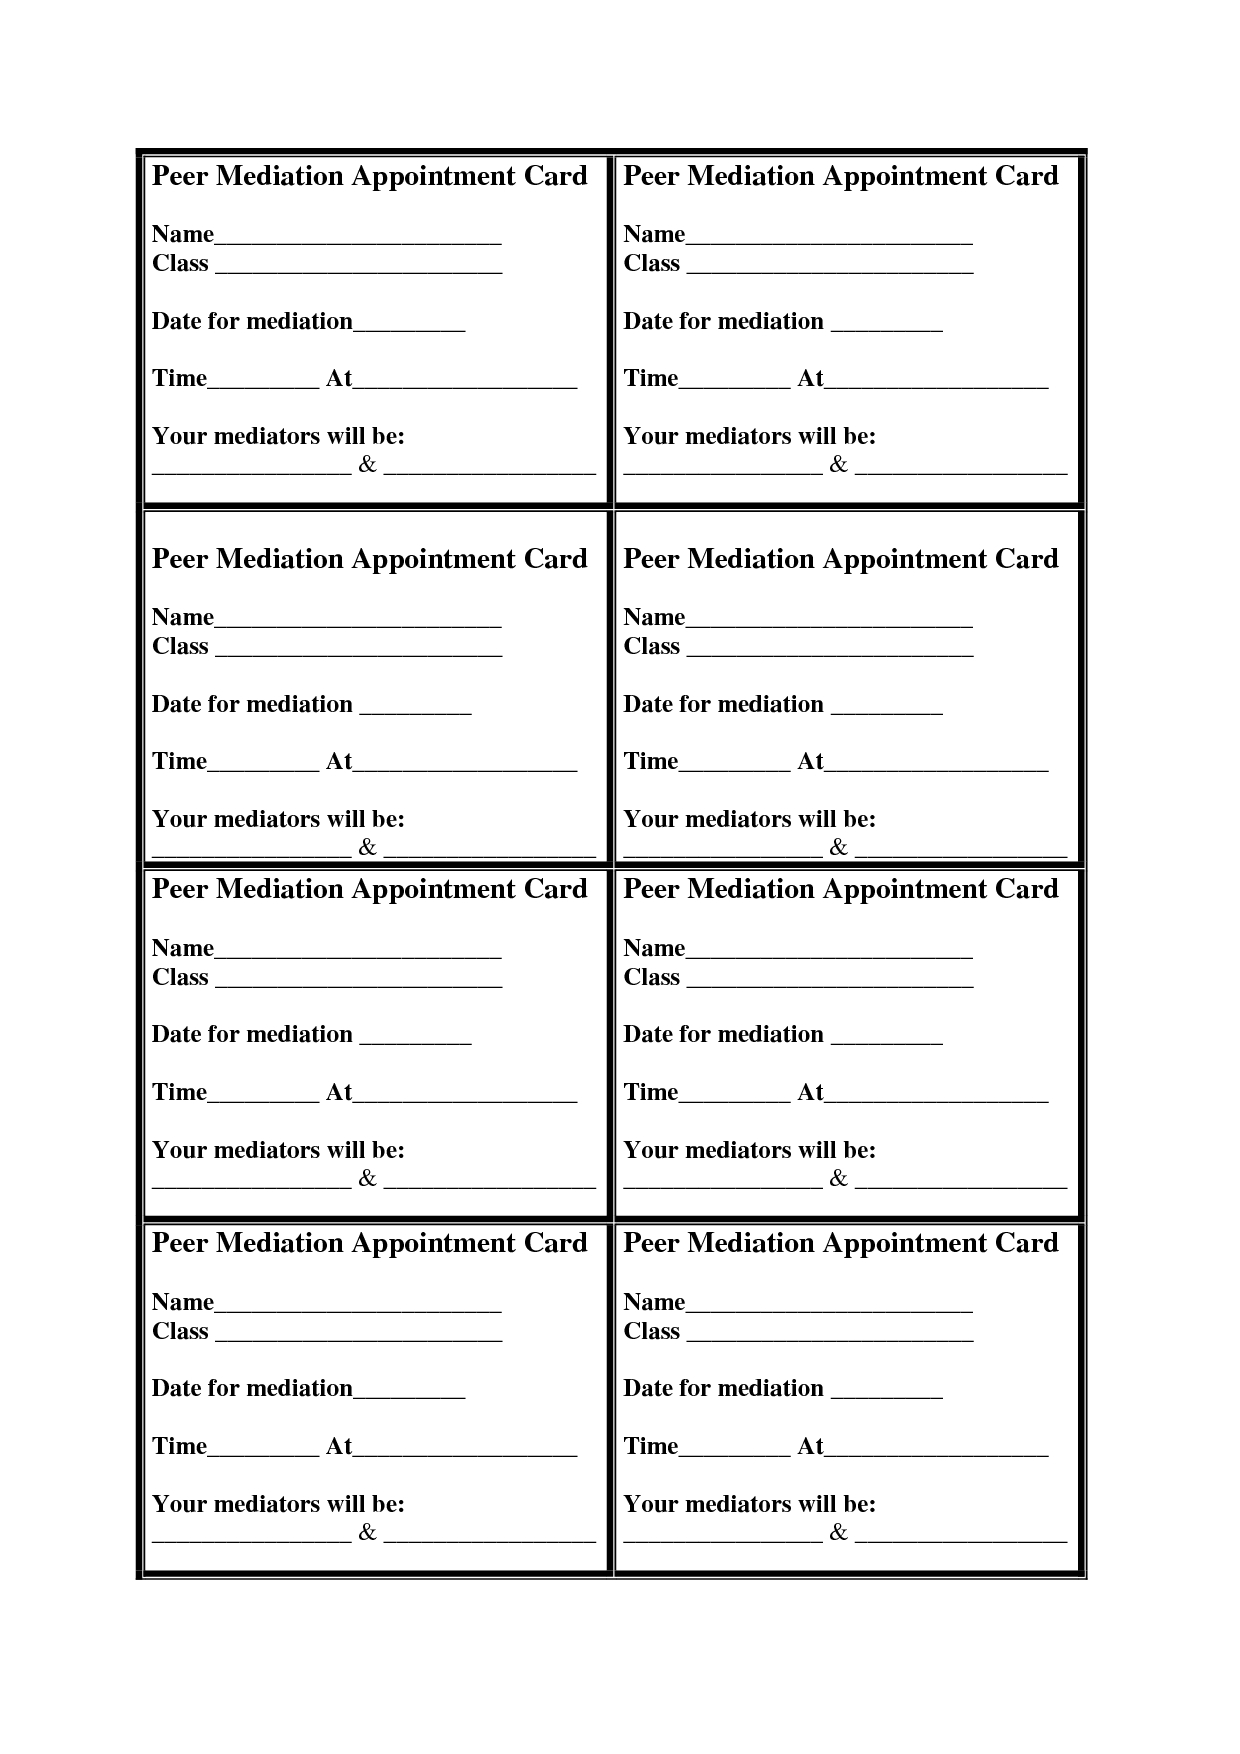 Medical Appointment Card Template Free ] - Appointment Card For Medical Appointment Card Template Free